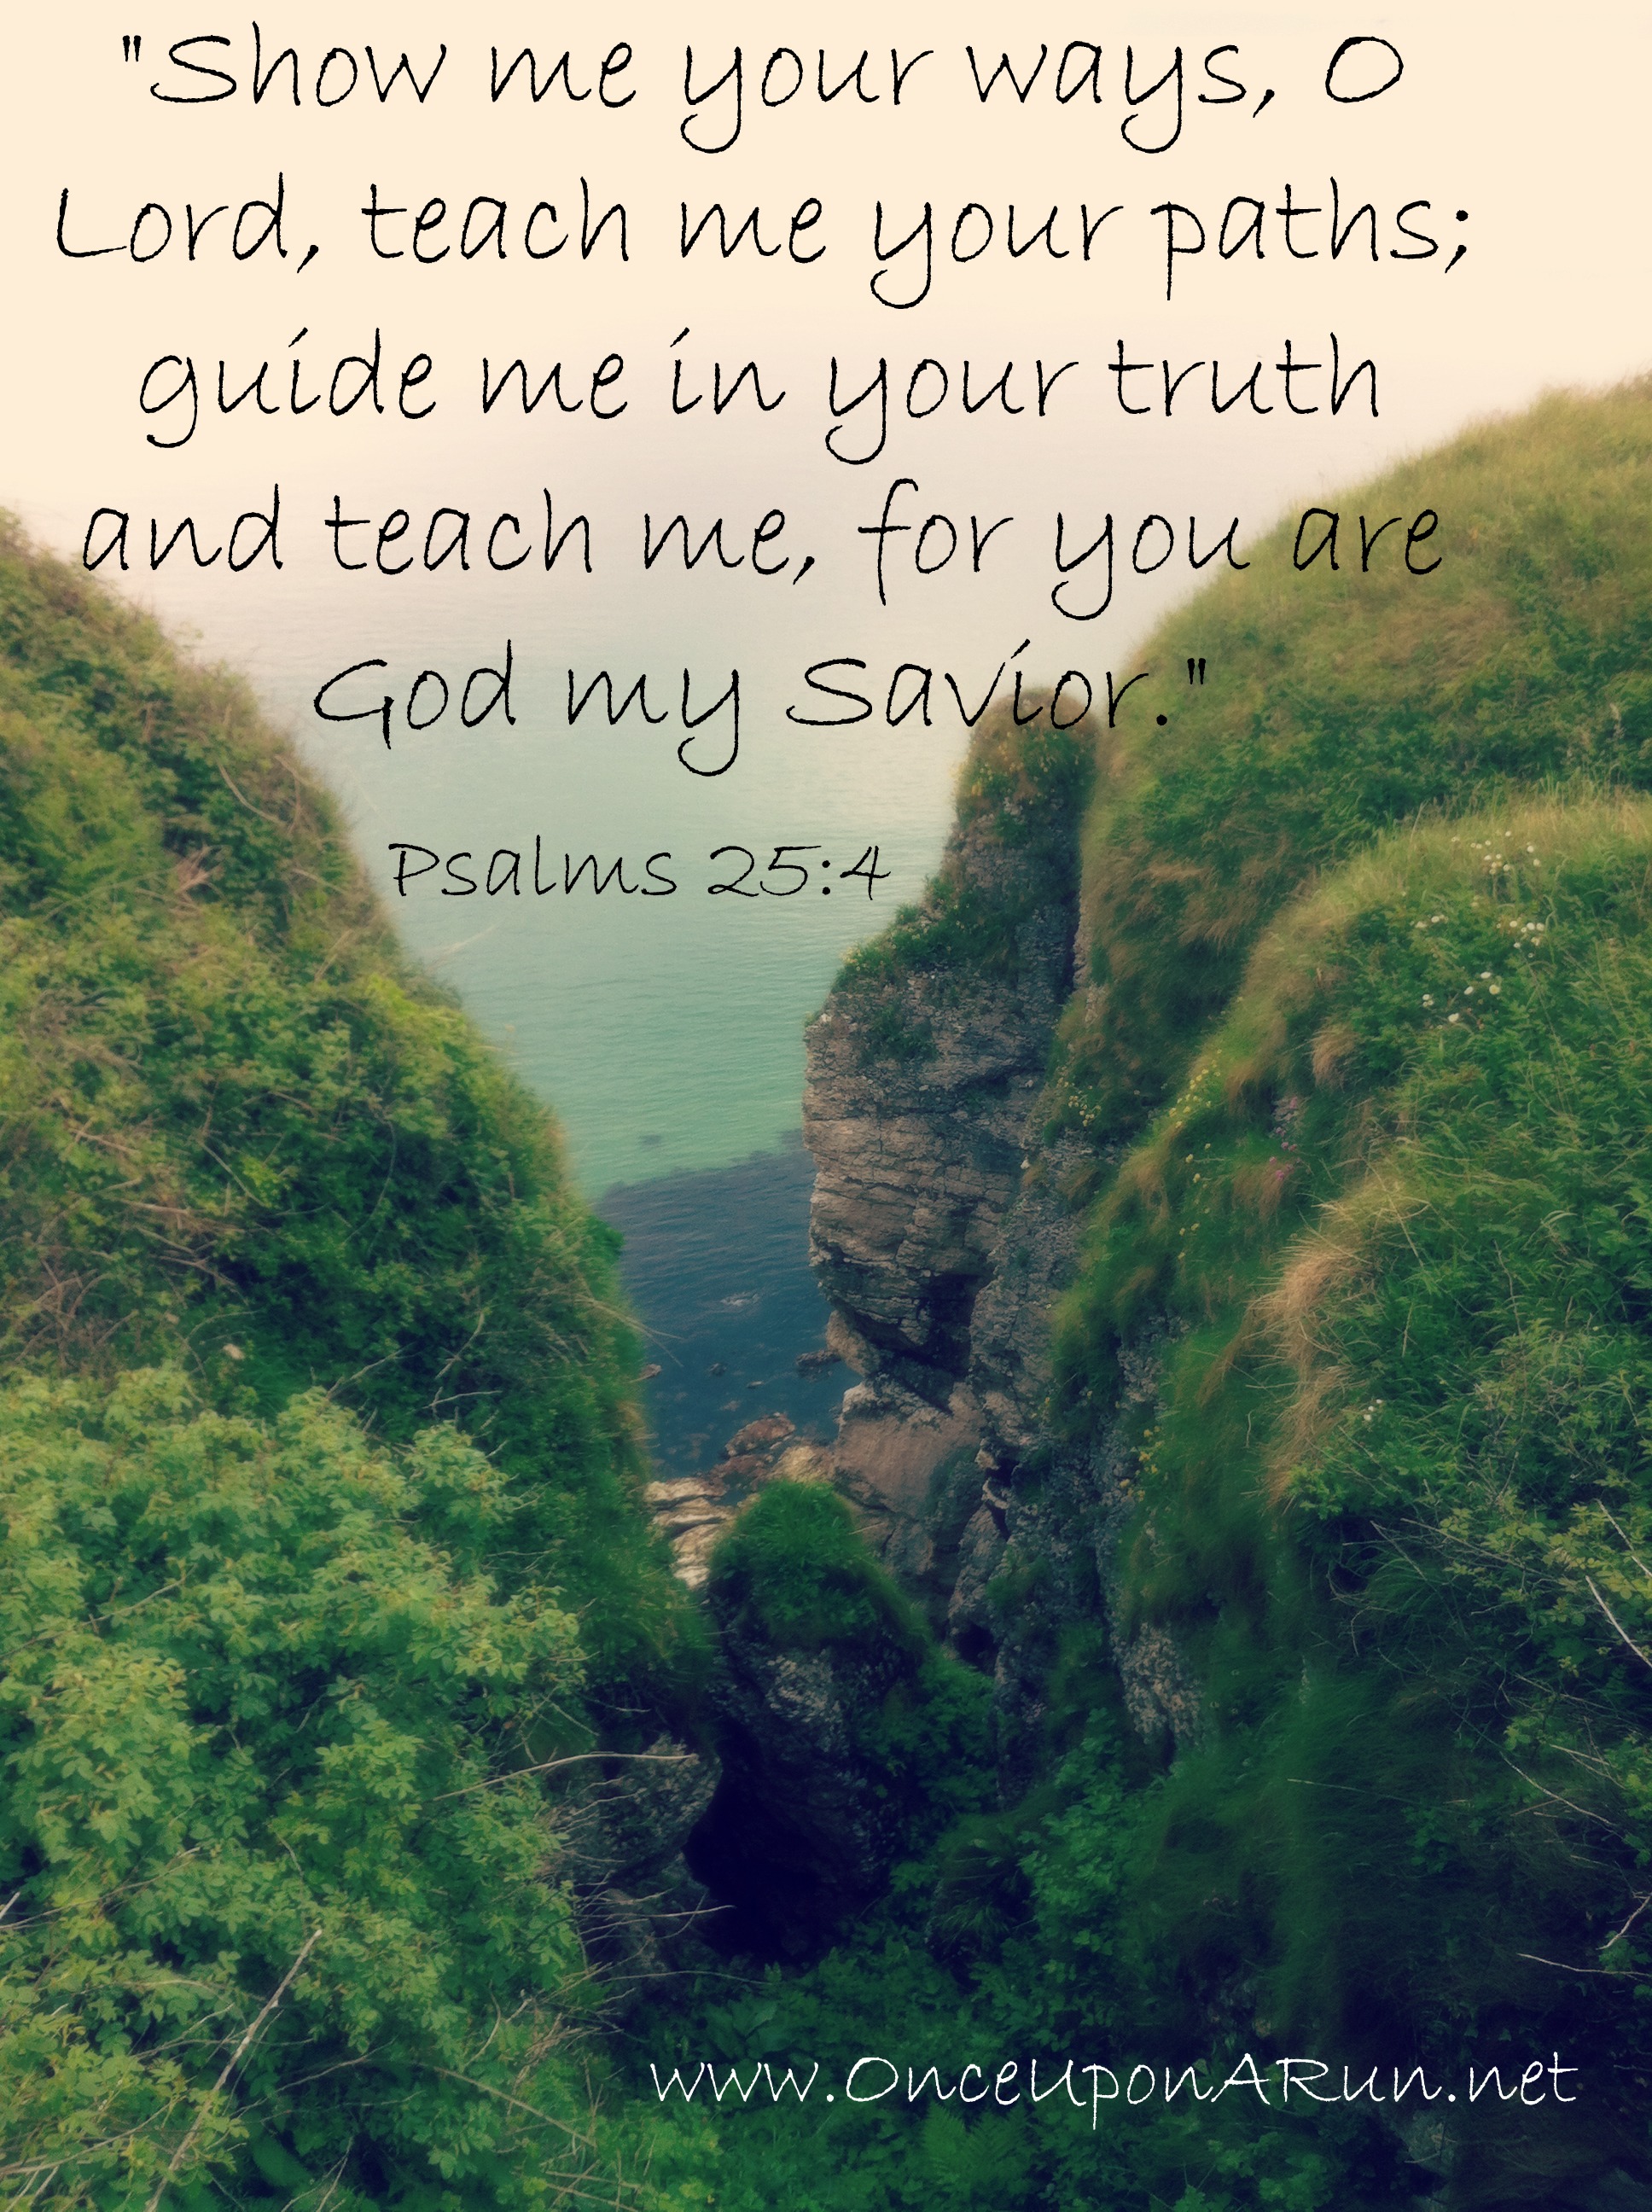 God Guides My Path Quotes. QuotesGram